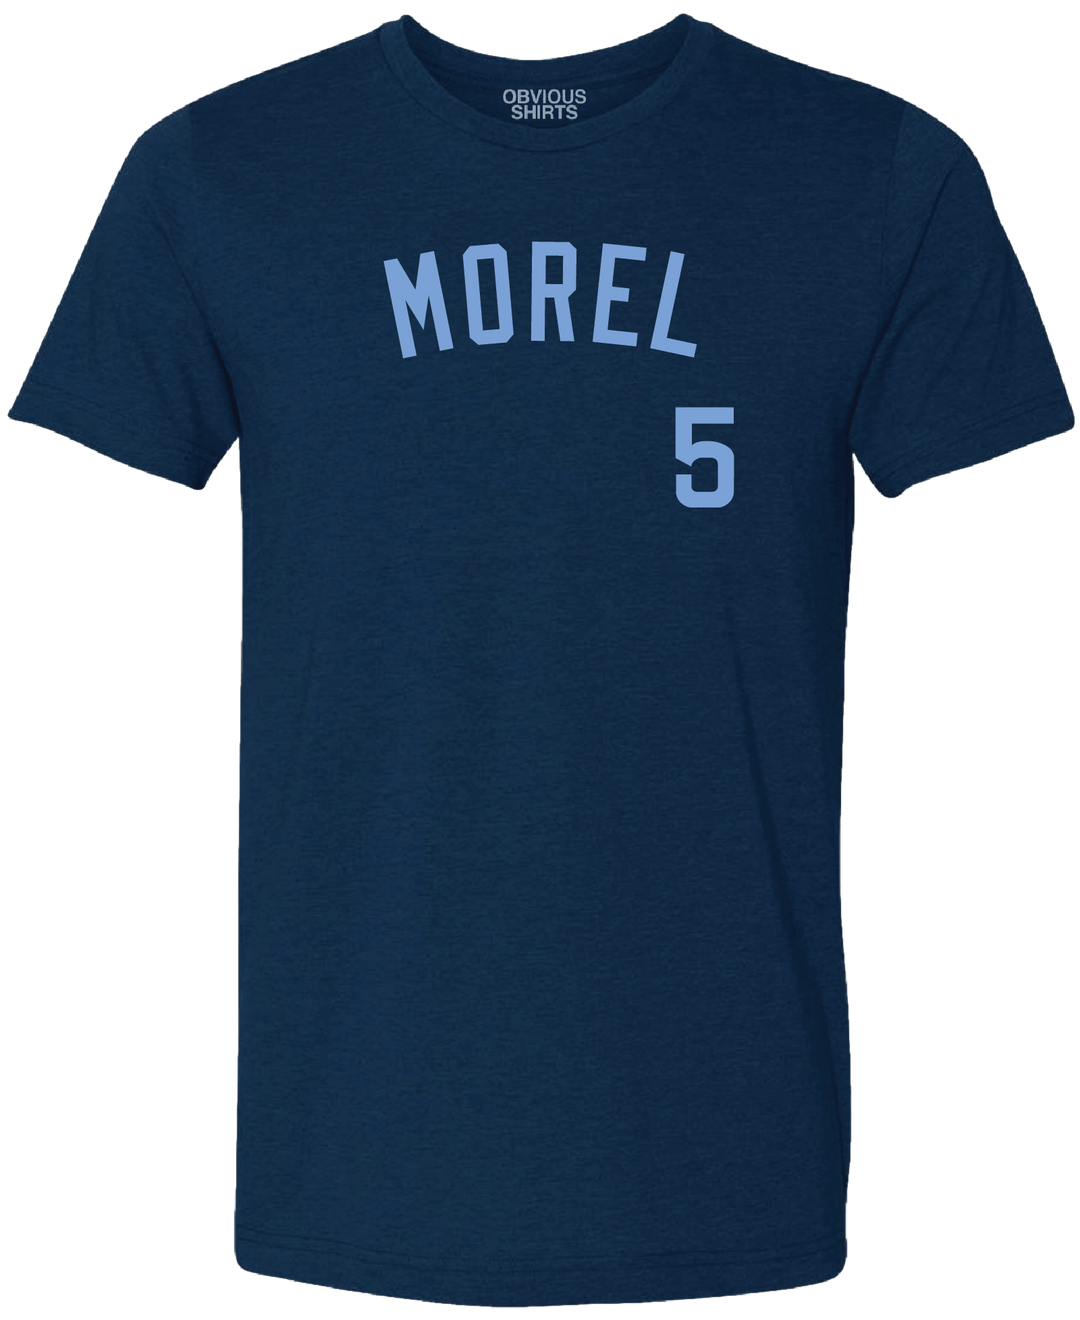 MOREL 5 (WRIGLEYVILLE EDITION) - OBVIOUS SHIRTS